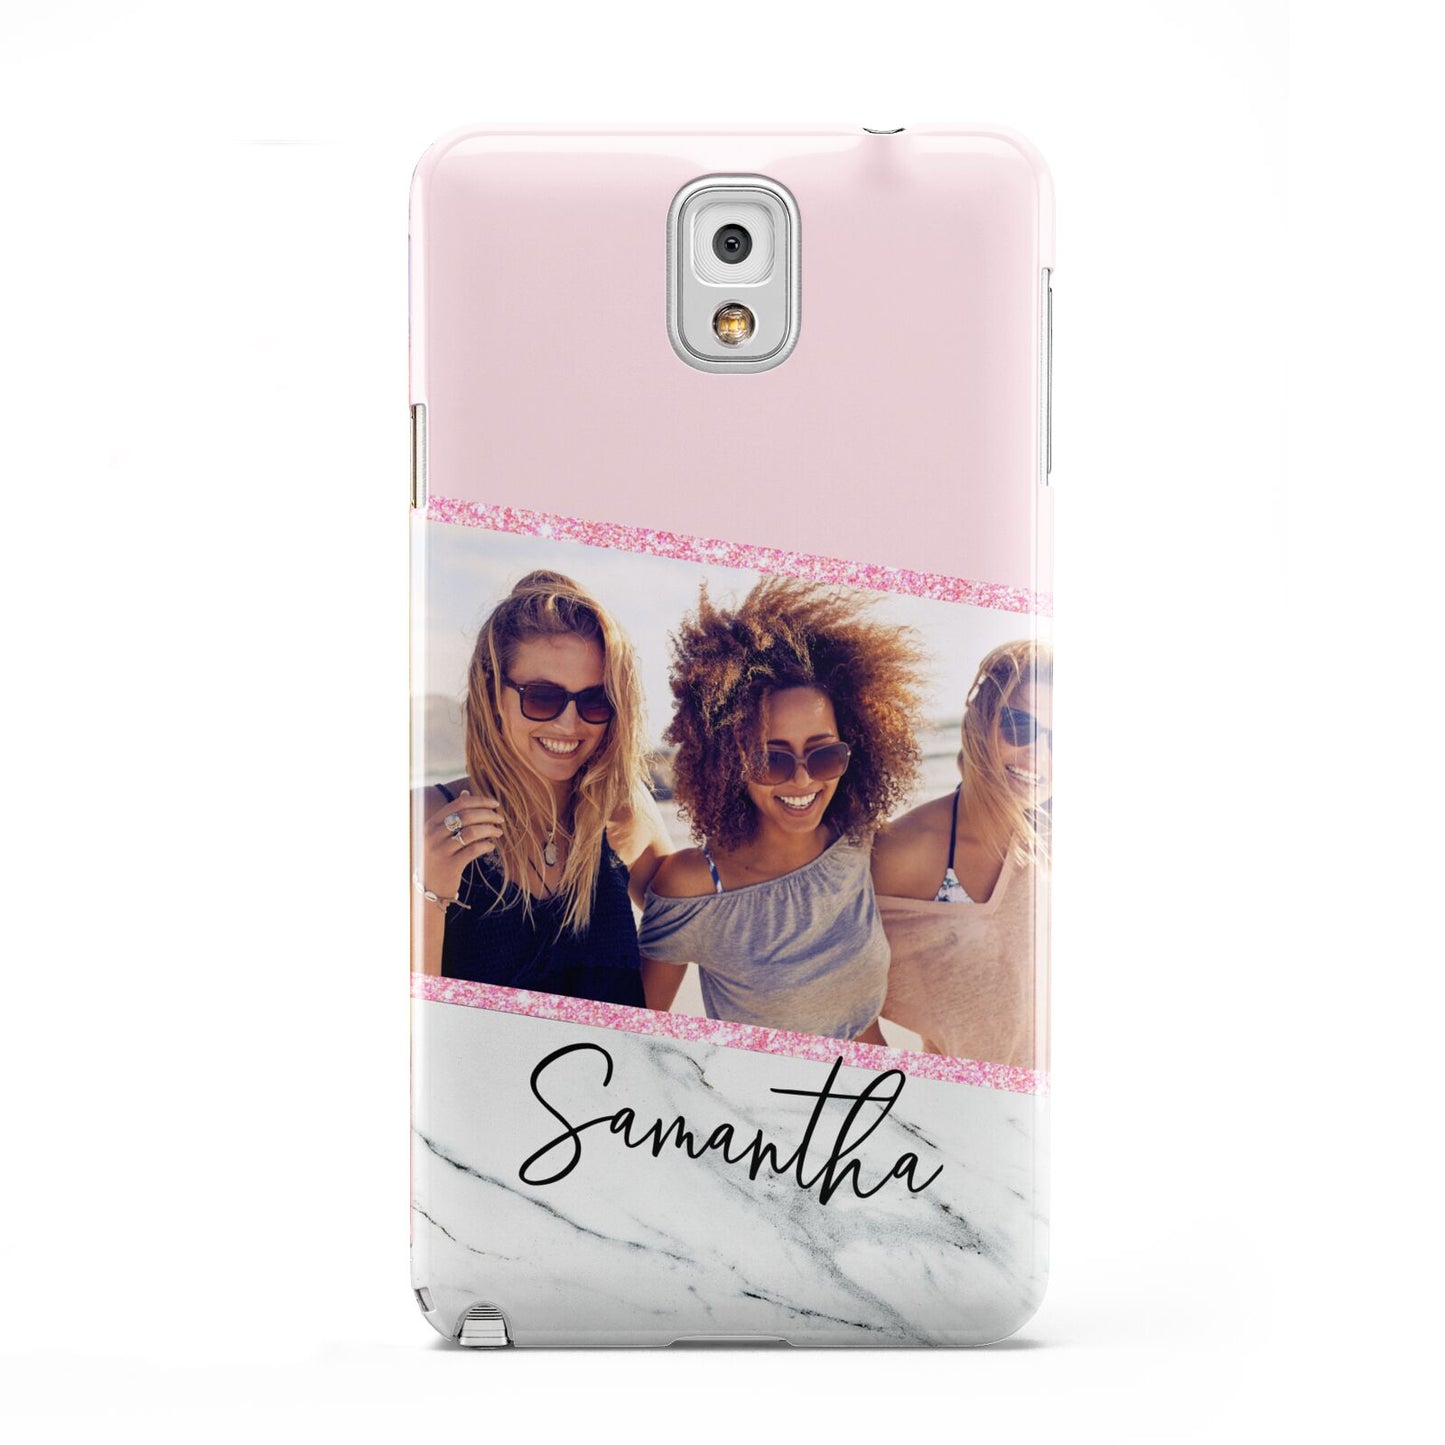 Personalised Marble Photo Name Samsung Galaxy Note 3 Case